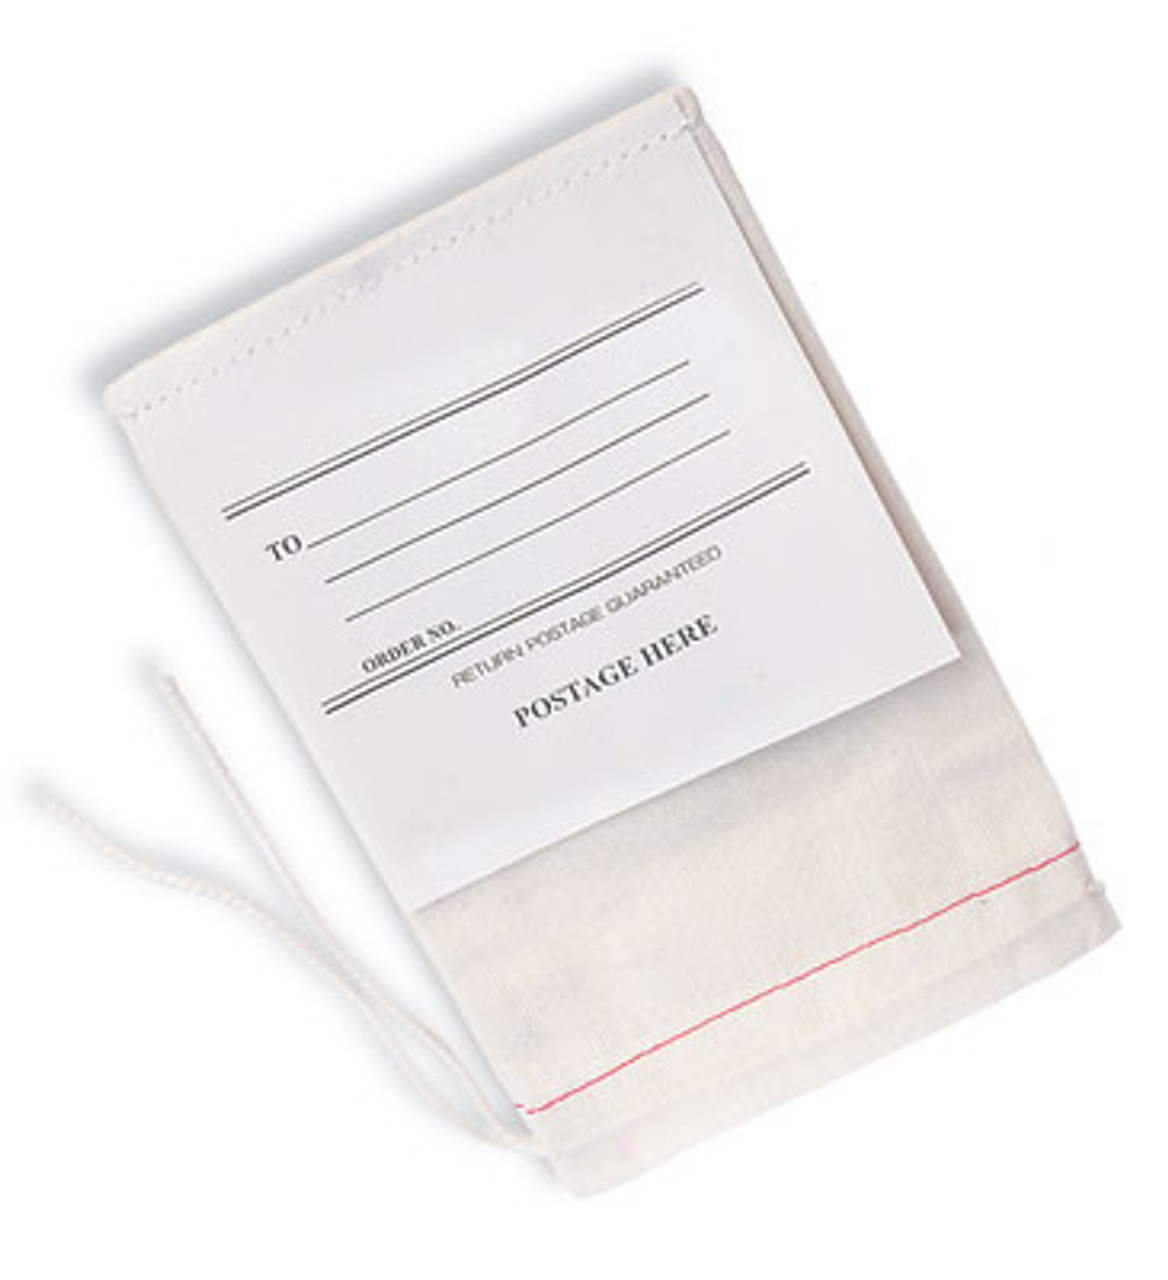 Economy Cloth Mailing Bag with Single Drawstring & Attached Tag (Qty) 500 Items